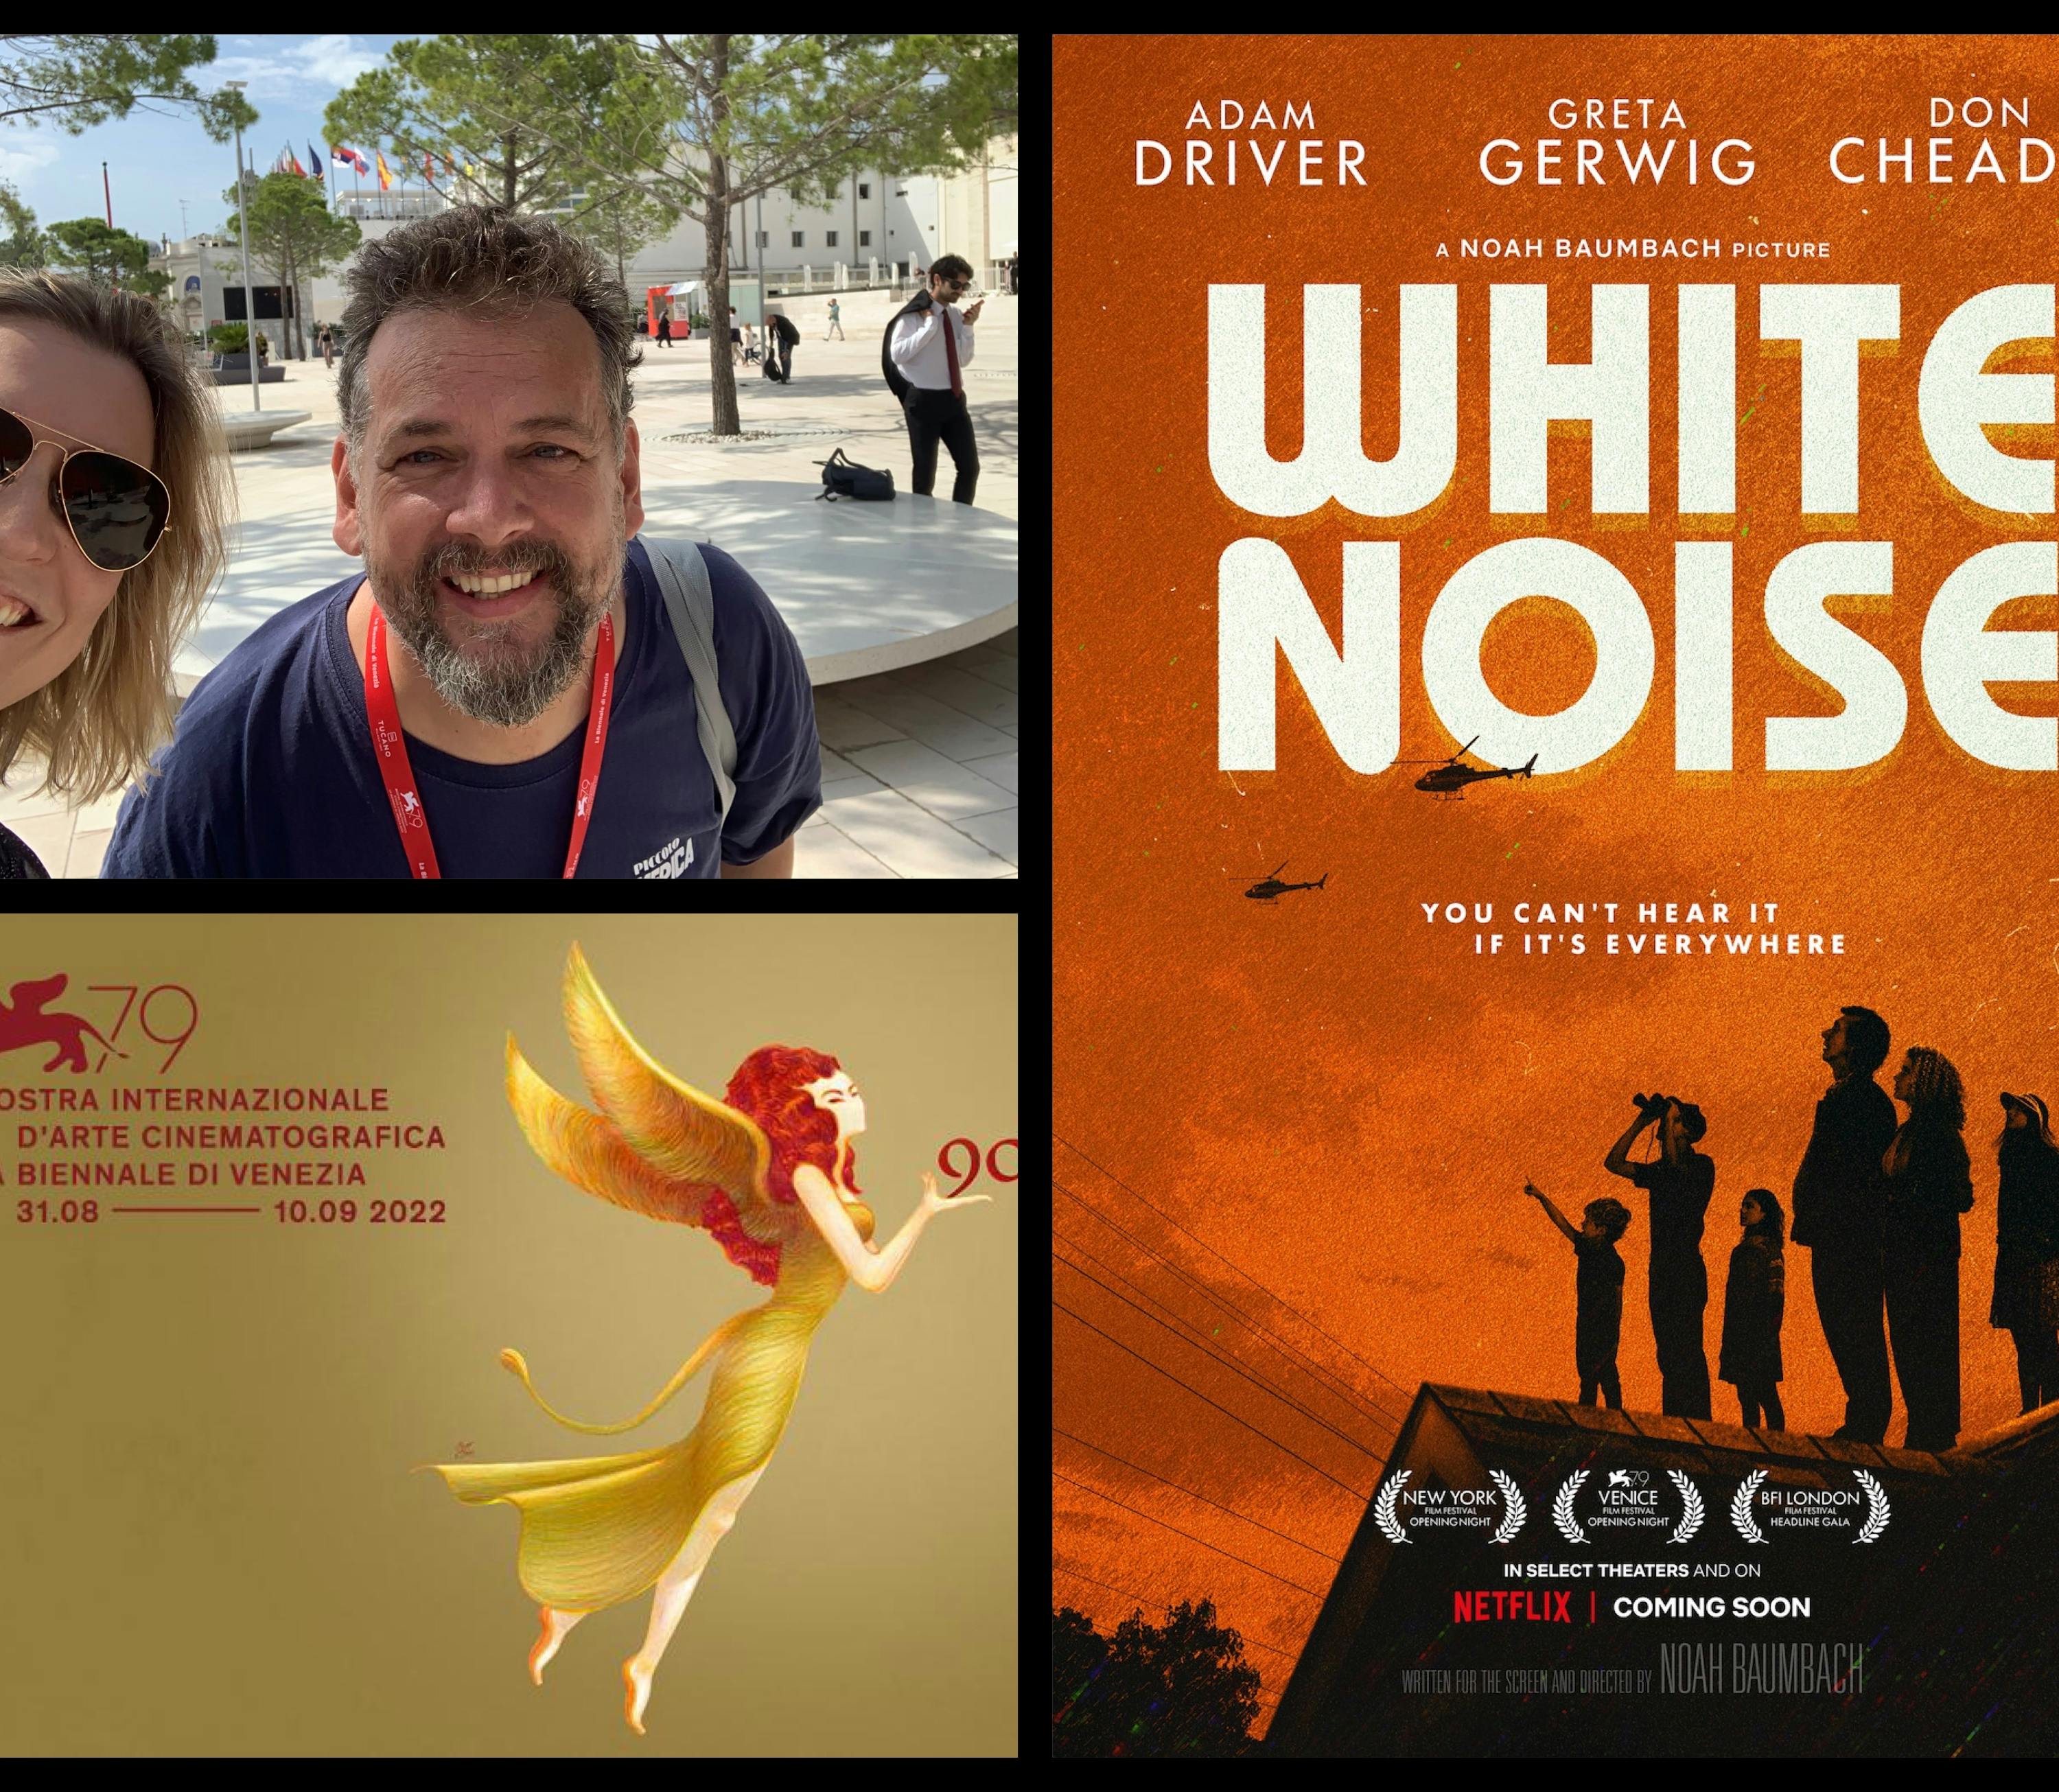 297: Venice Film Festival 2022 dispatch. Review and first reactions,  "White Noise"!  With critic John Bleasdale.